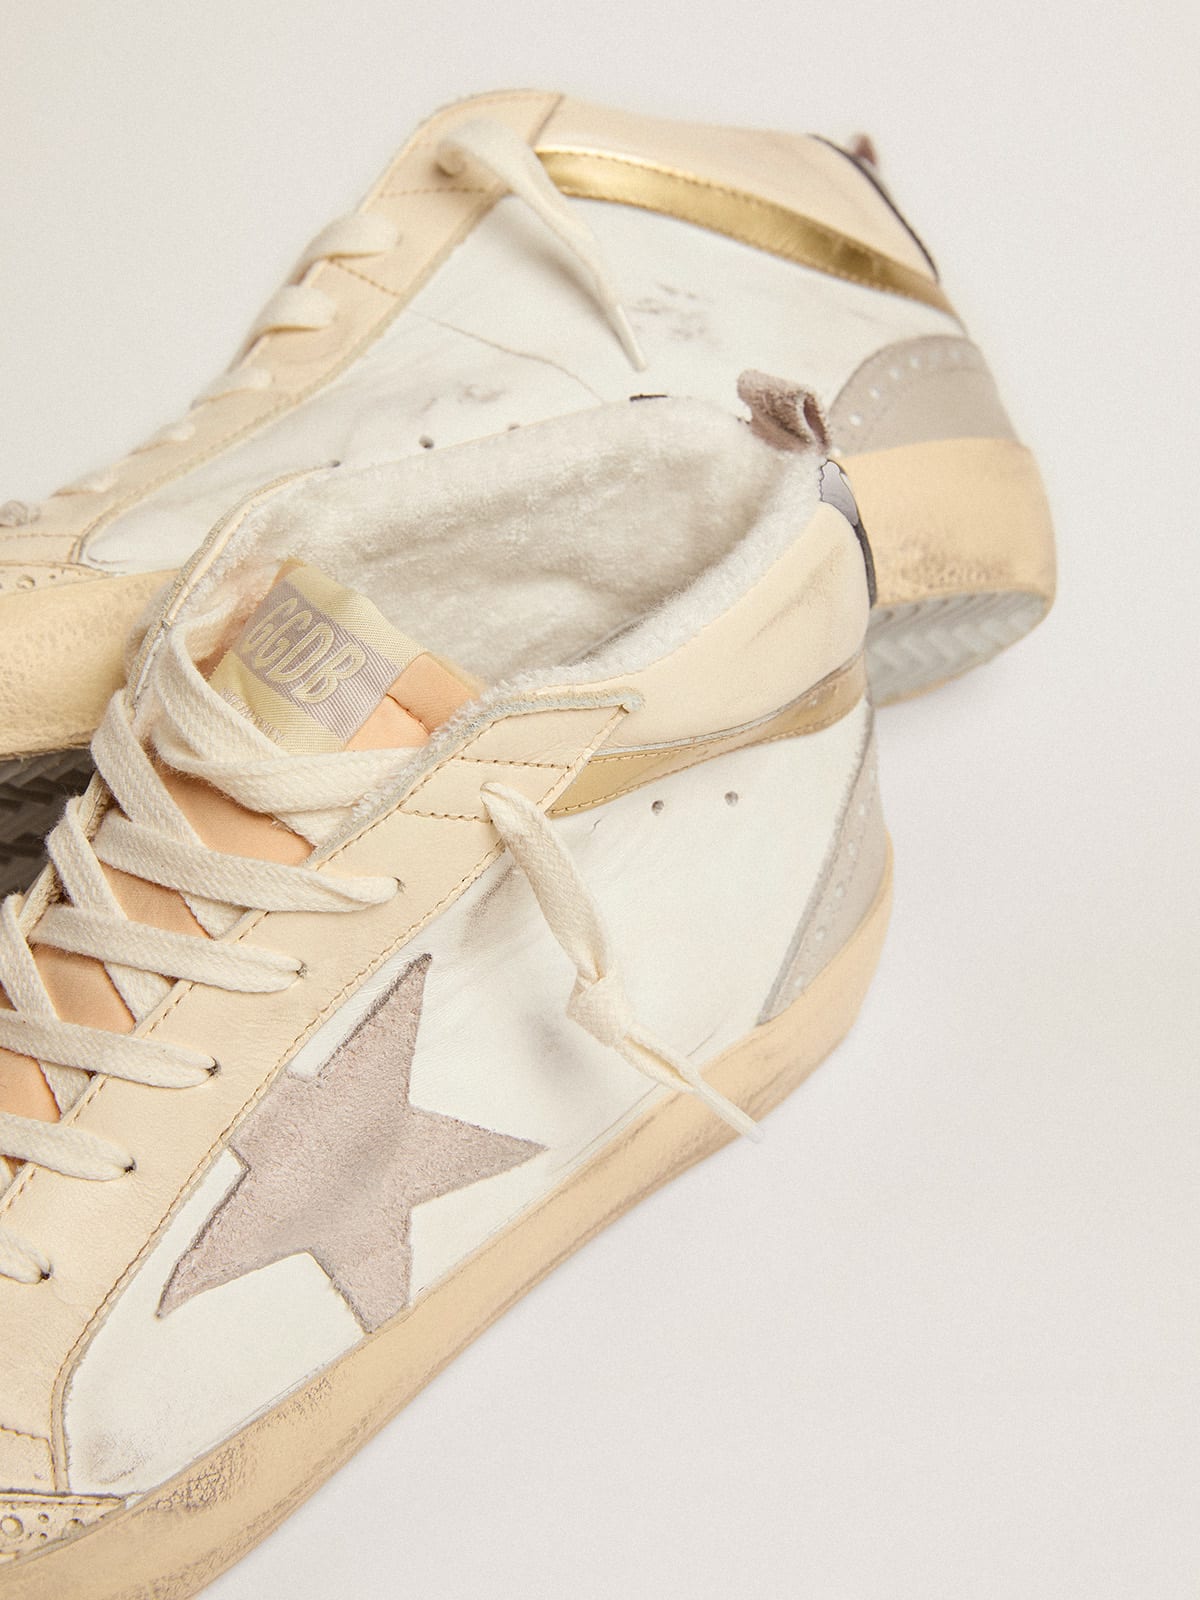 Golden Goose - Men's Mid Star with light gray suede star and gold flash in 